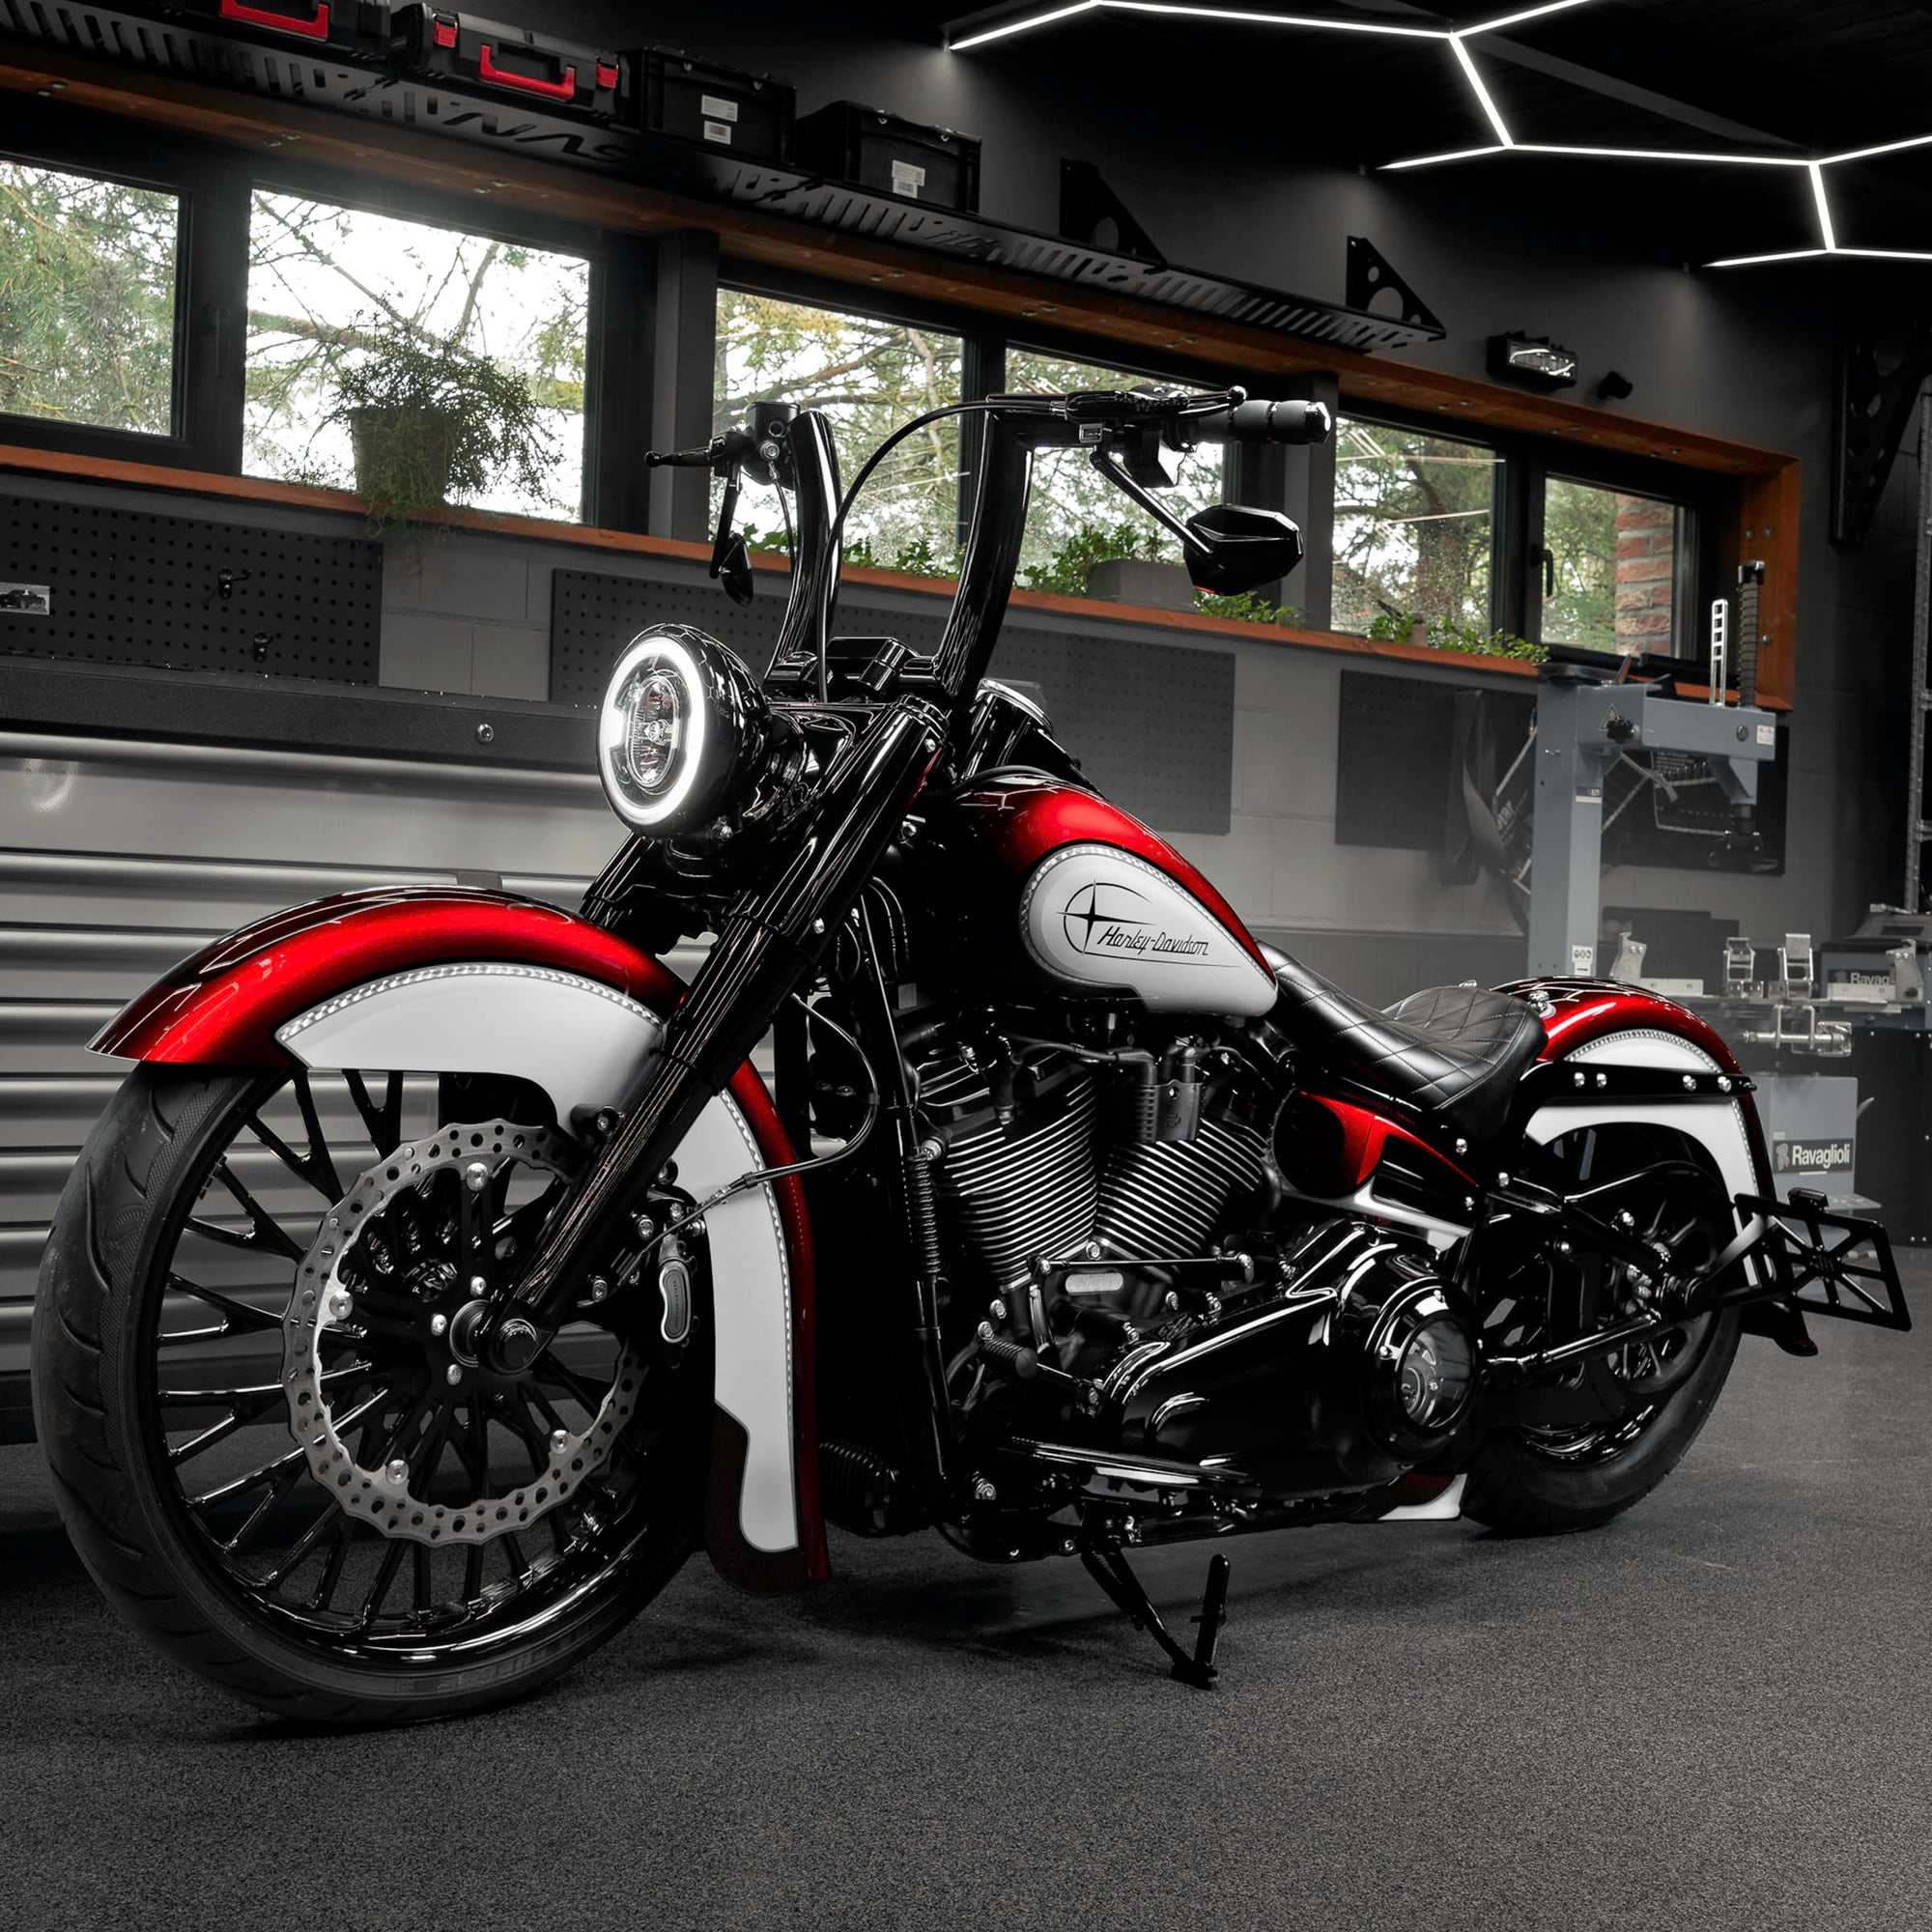 Modified Harley Davidson Heritage motorcycle with Killer Custom parts from the side in a modern bike shop